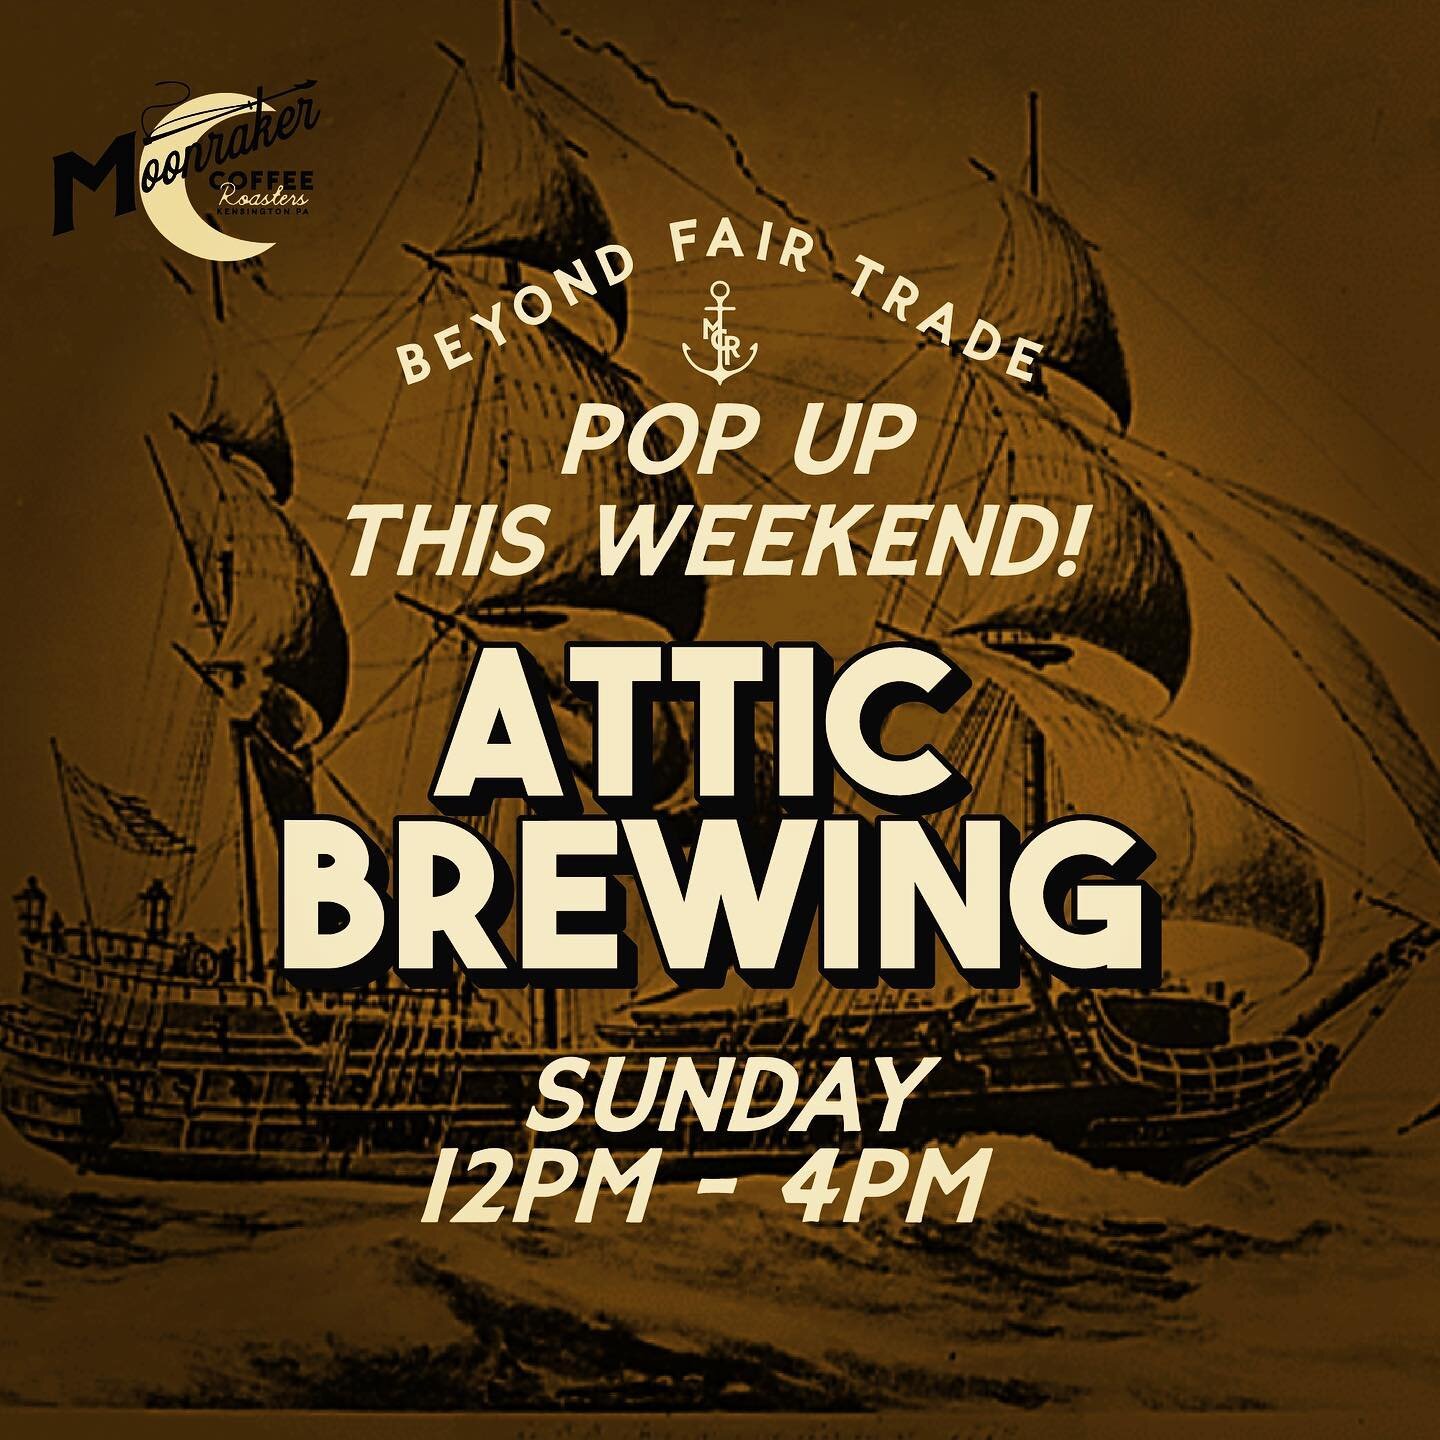 Yo Philly! 

Moonraker Coffee Roasters is headed to Attic Brewery in GTown tomorrow, Sunday, from 12 - 4. 

Come say hi!